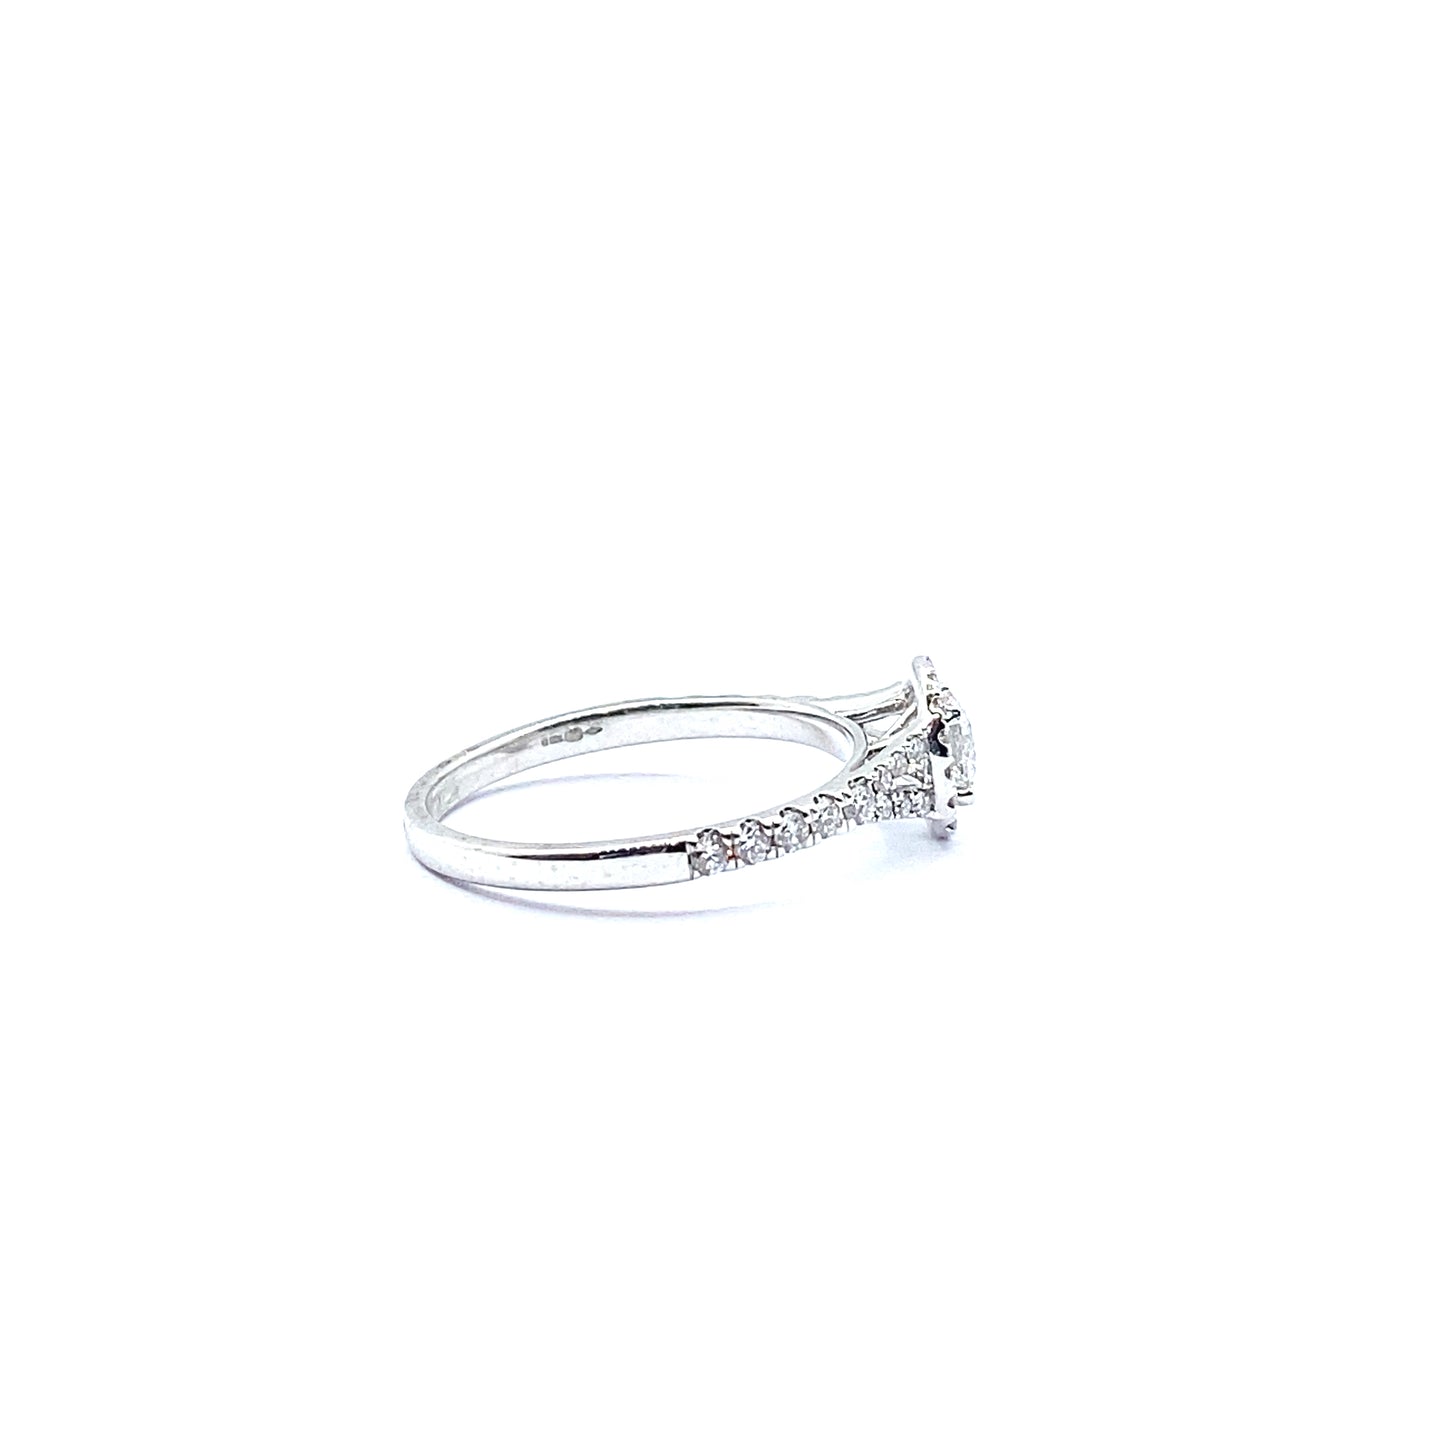 Round Brilliant Halo Ring with Diamond Set Split Shoulders in 18ct White Gold